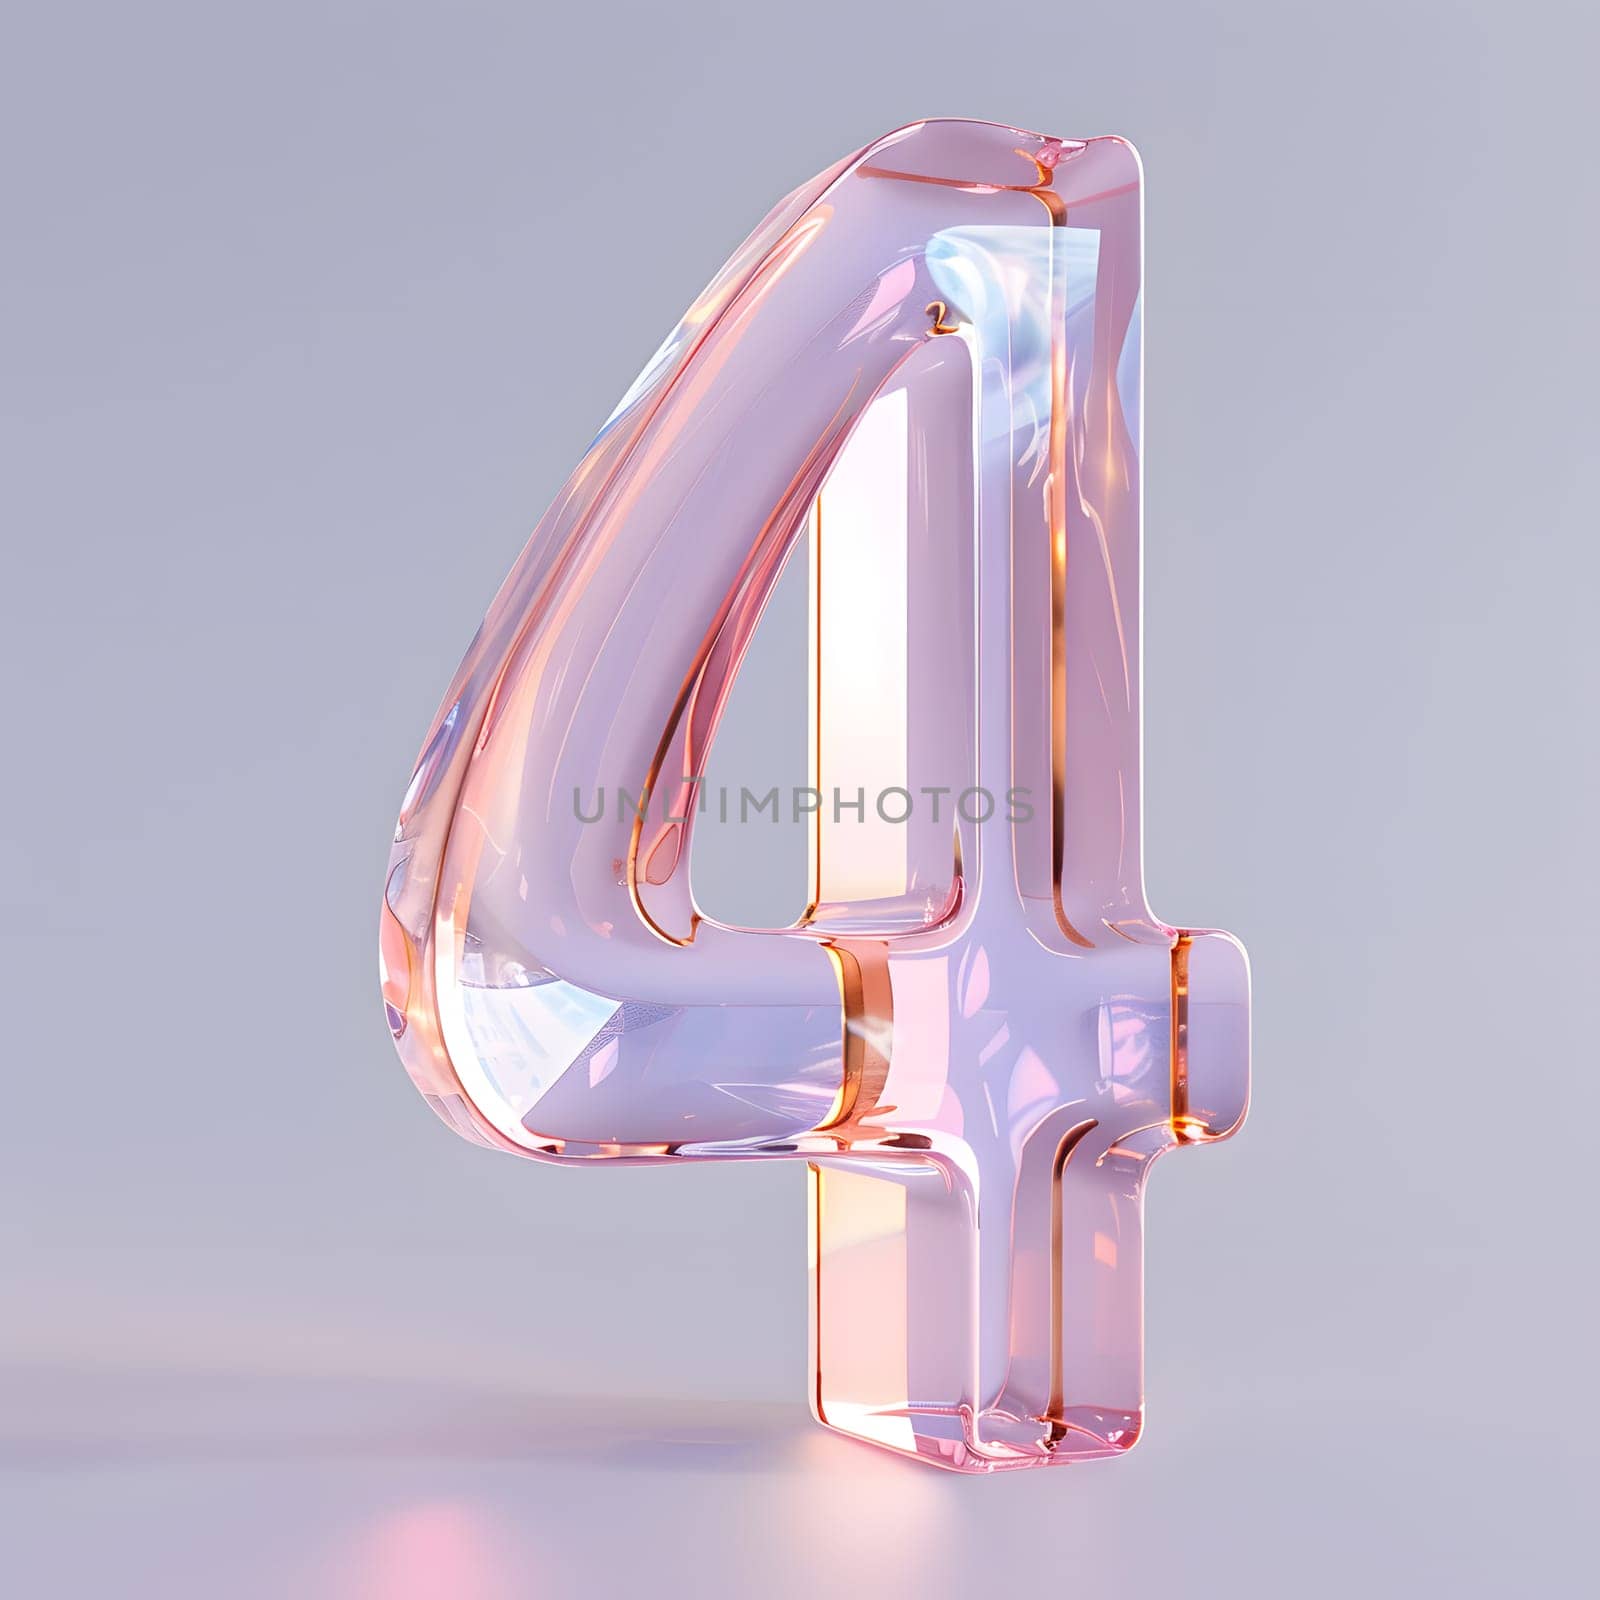 The number four can be represented in a variety of forms, including automotive lighting, drinkware, jewelry, fonts, magenta, eyewear, electric blue, fashion accessories, metals, and plastics